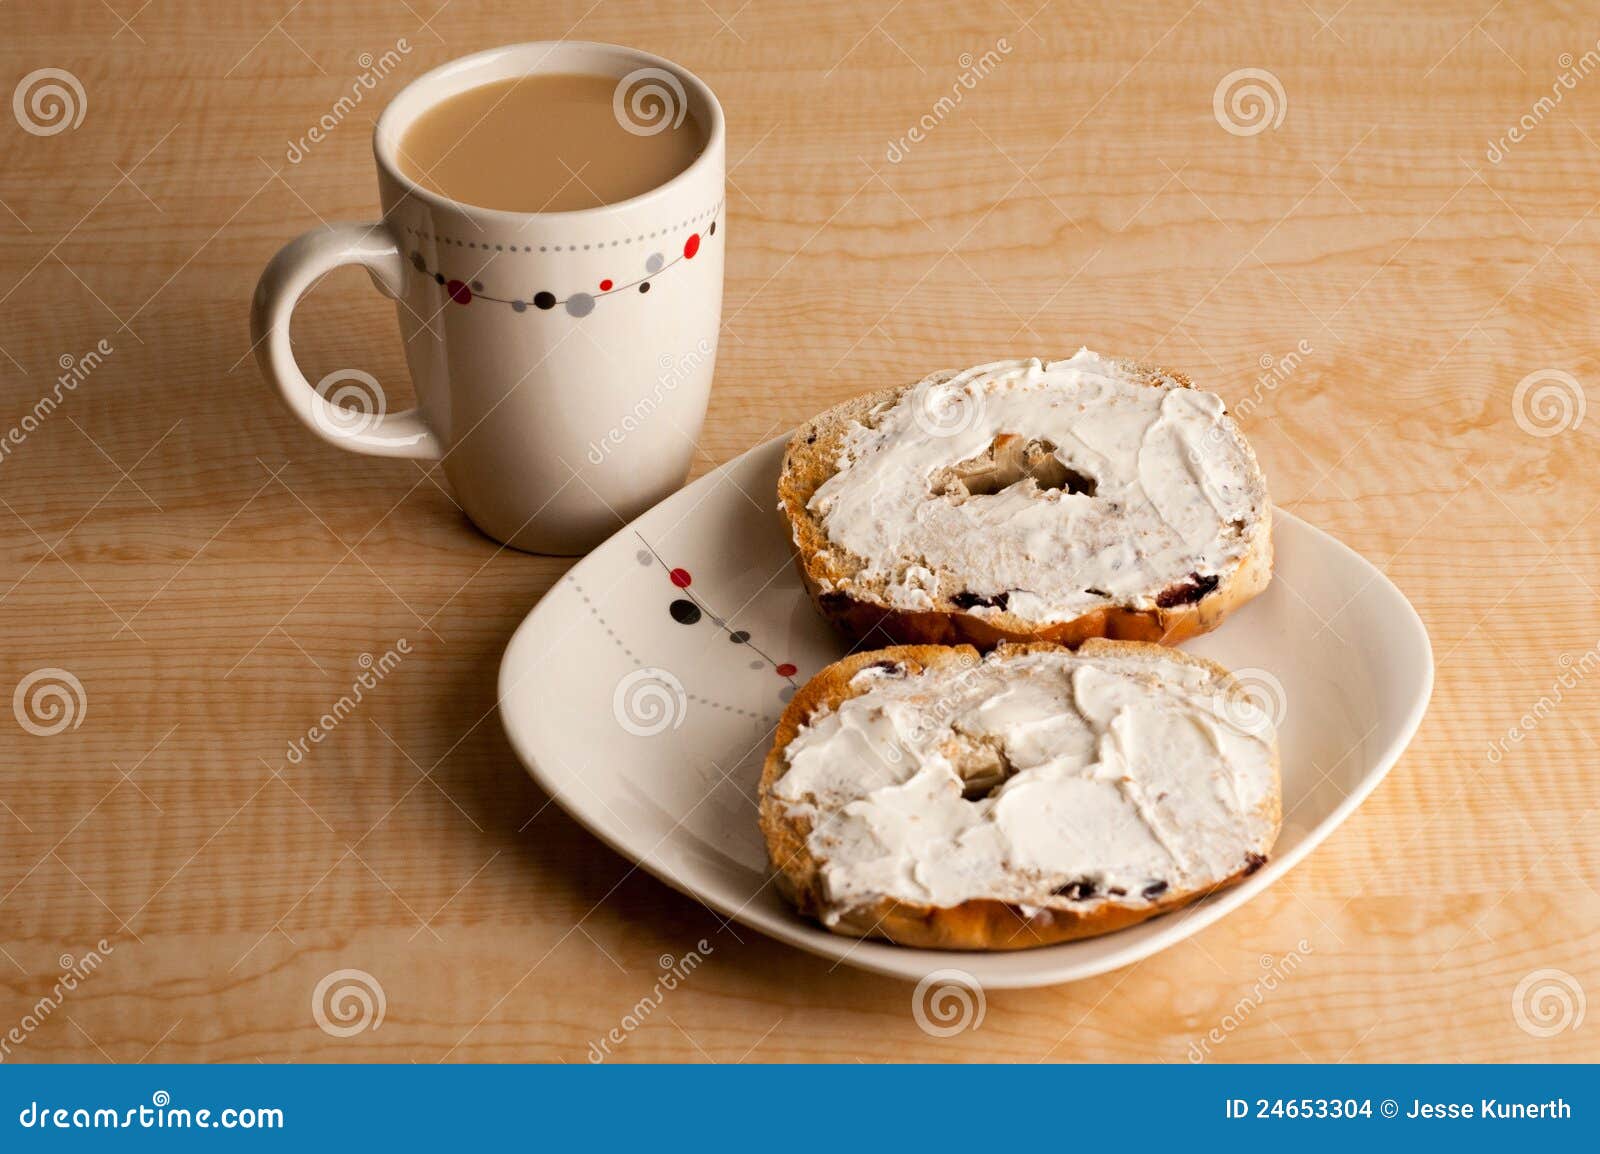 clipart bagels and coffee - photo #34